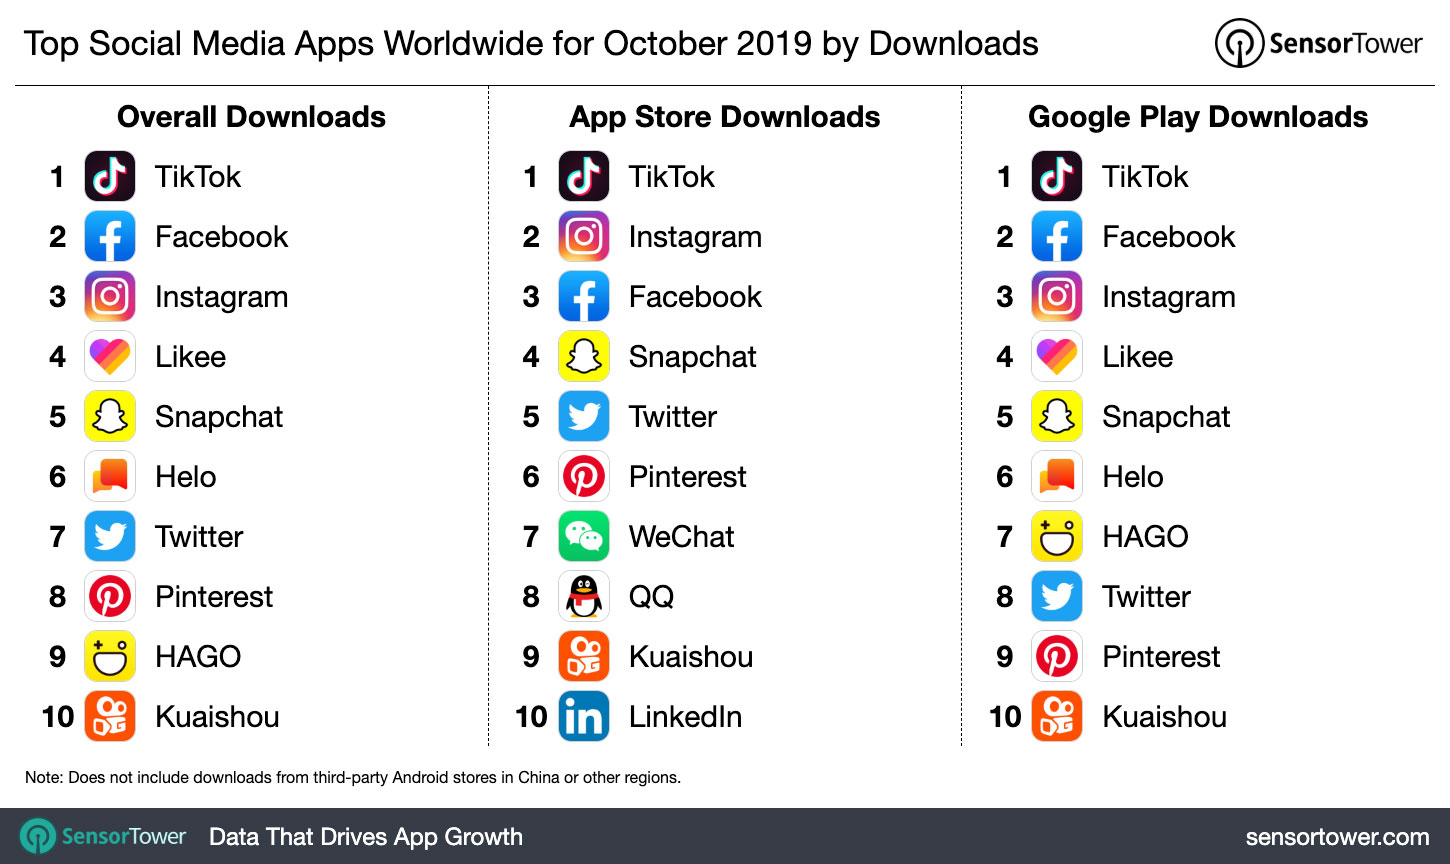 Top Social Media Apps Worldwide for October 2019 by Downloads